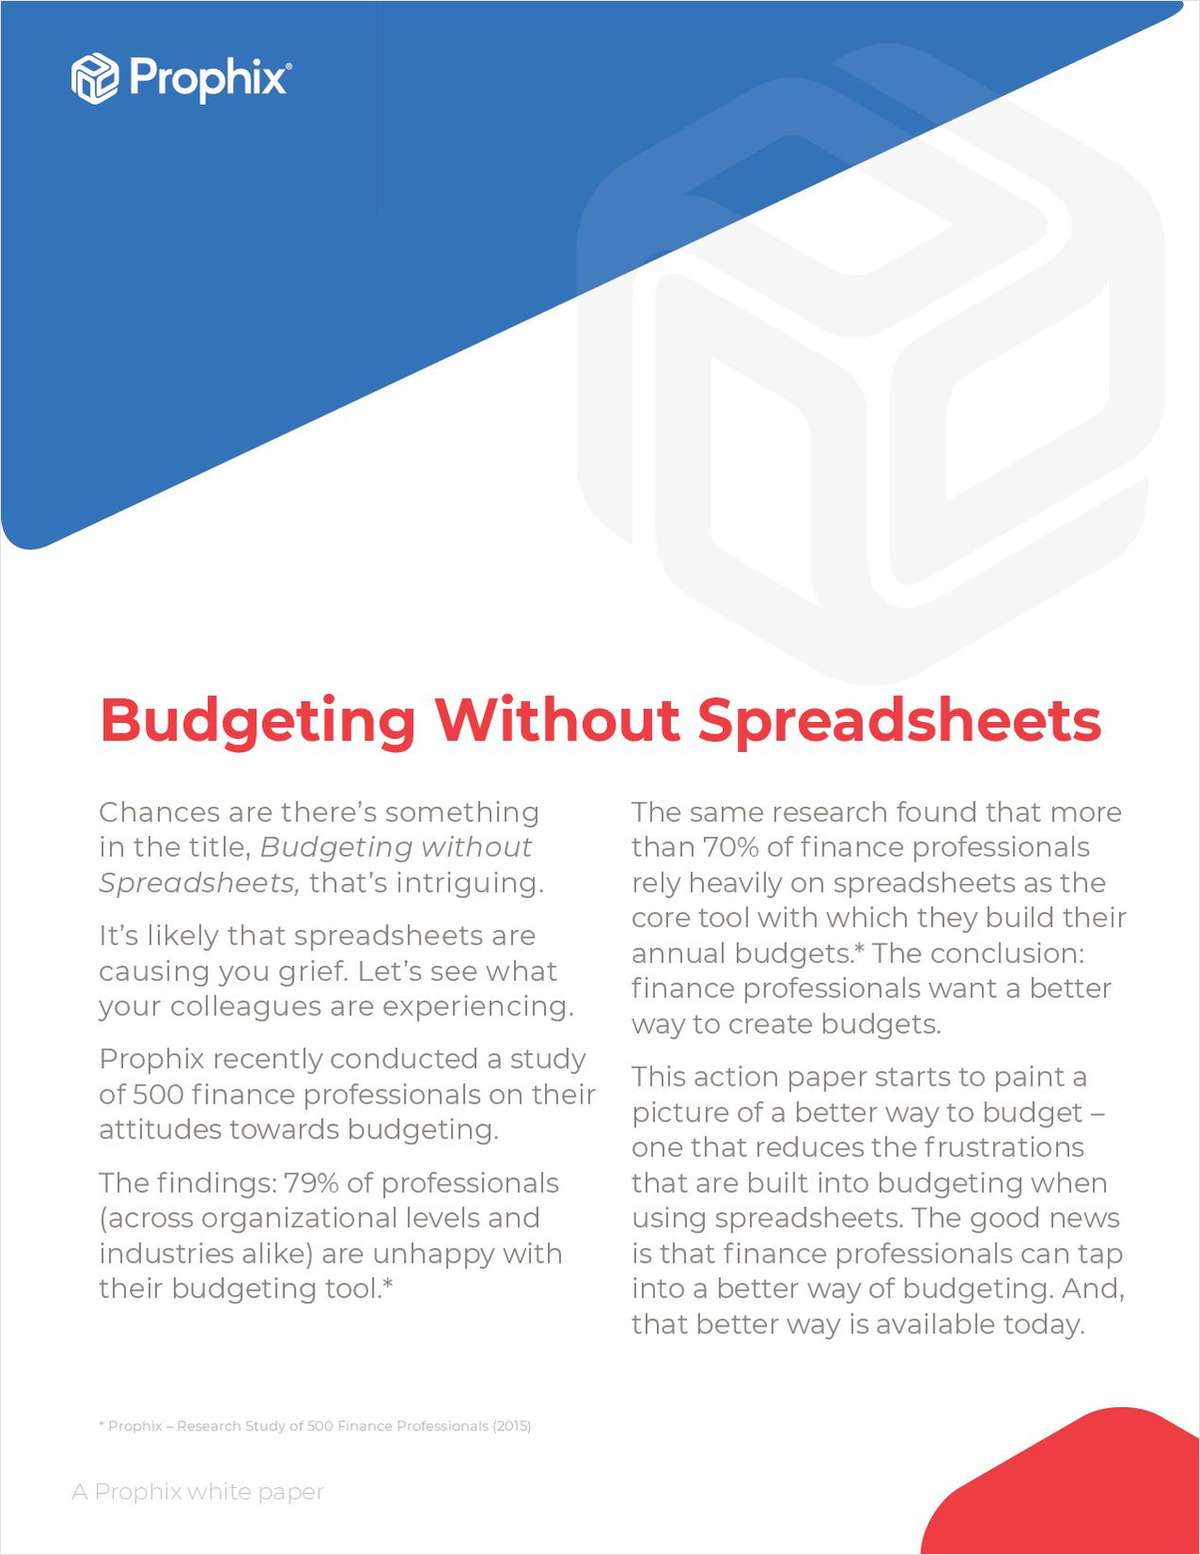 Learn To Budget Without Using Spreadsheets